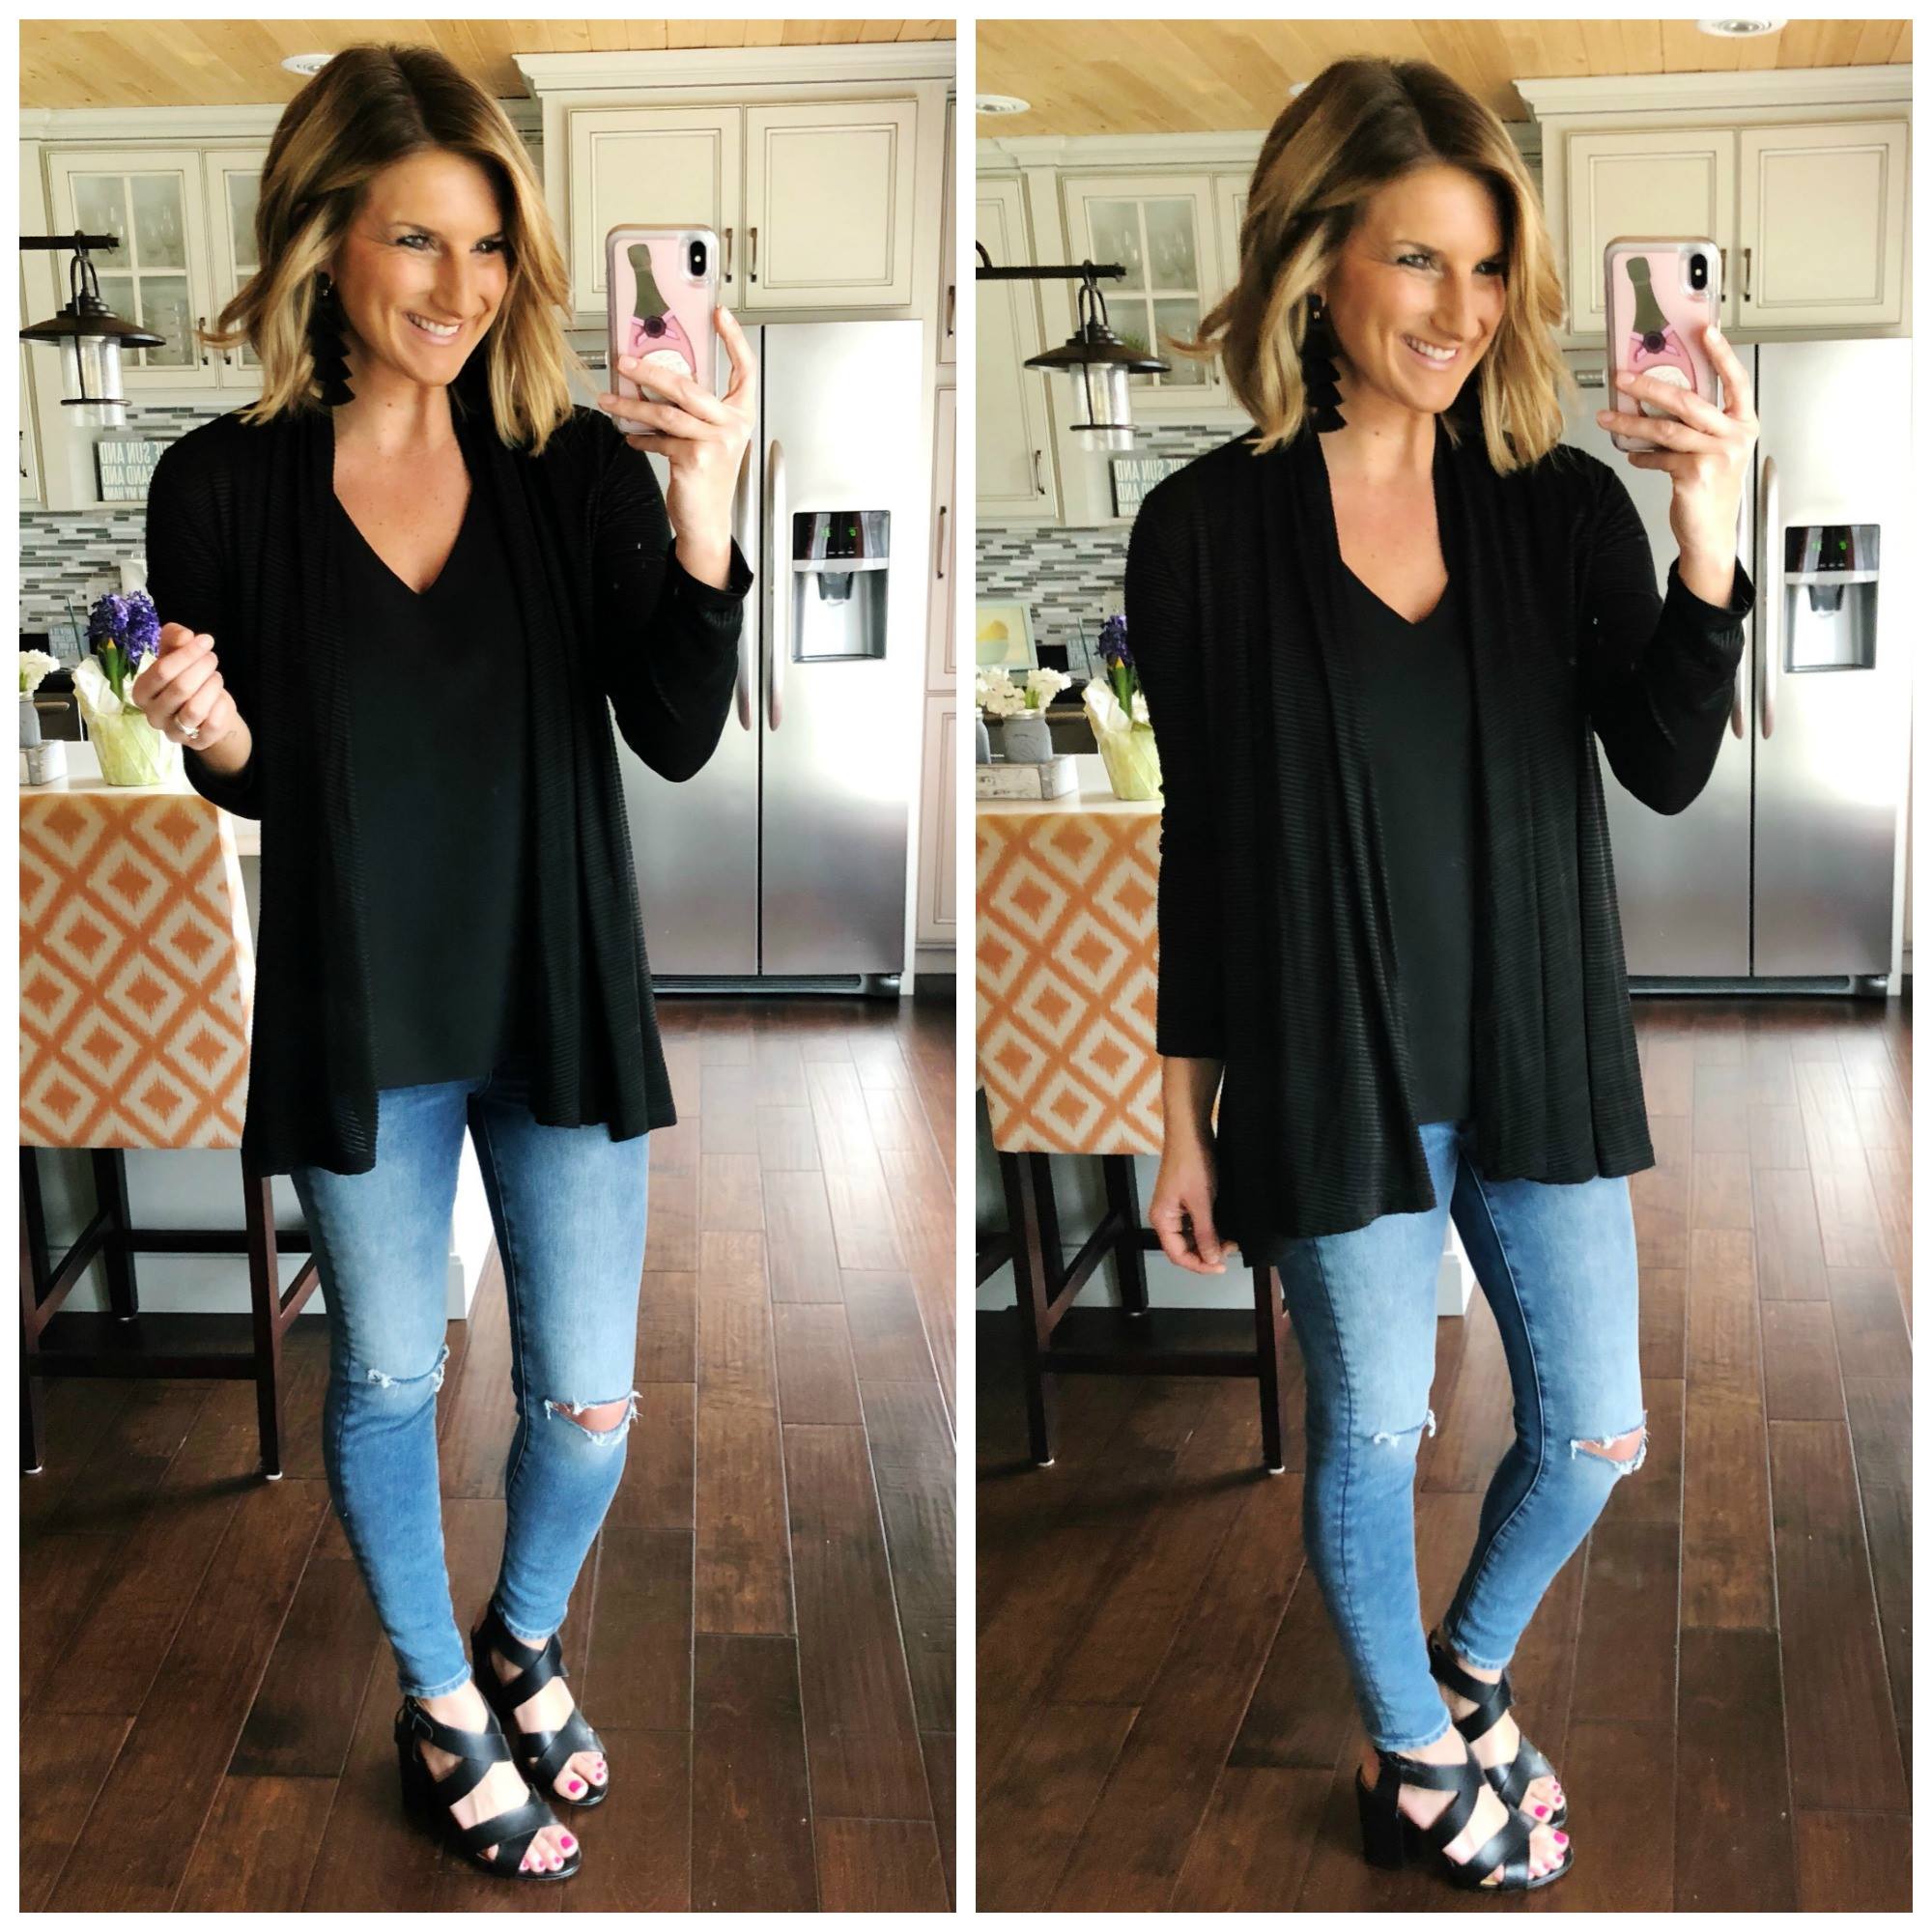 What to wear on date night // black v neck top + cropped jeggings + lightweight cardigan + strappy sandals + tassel earrings // statement earrings 